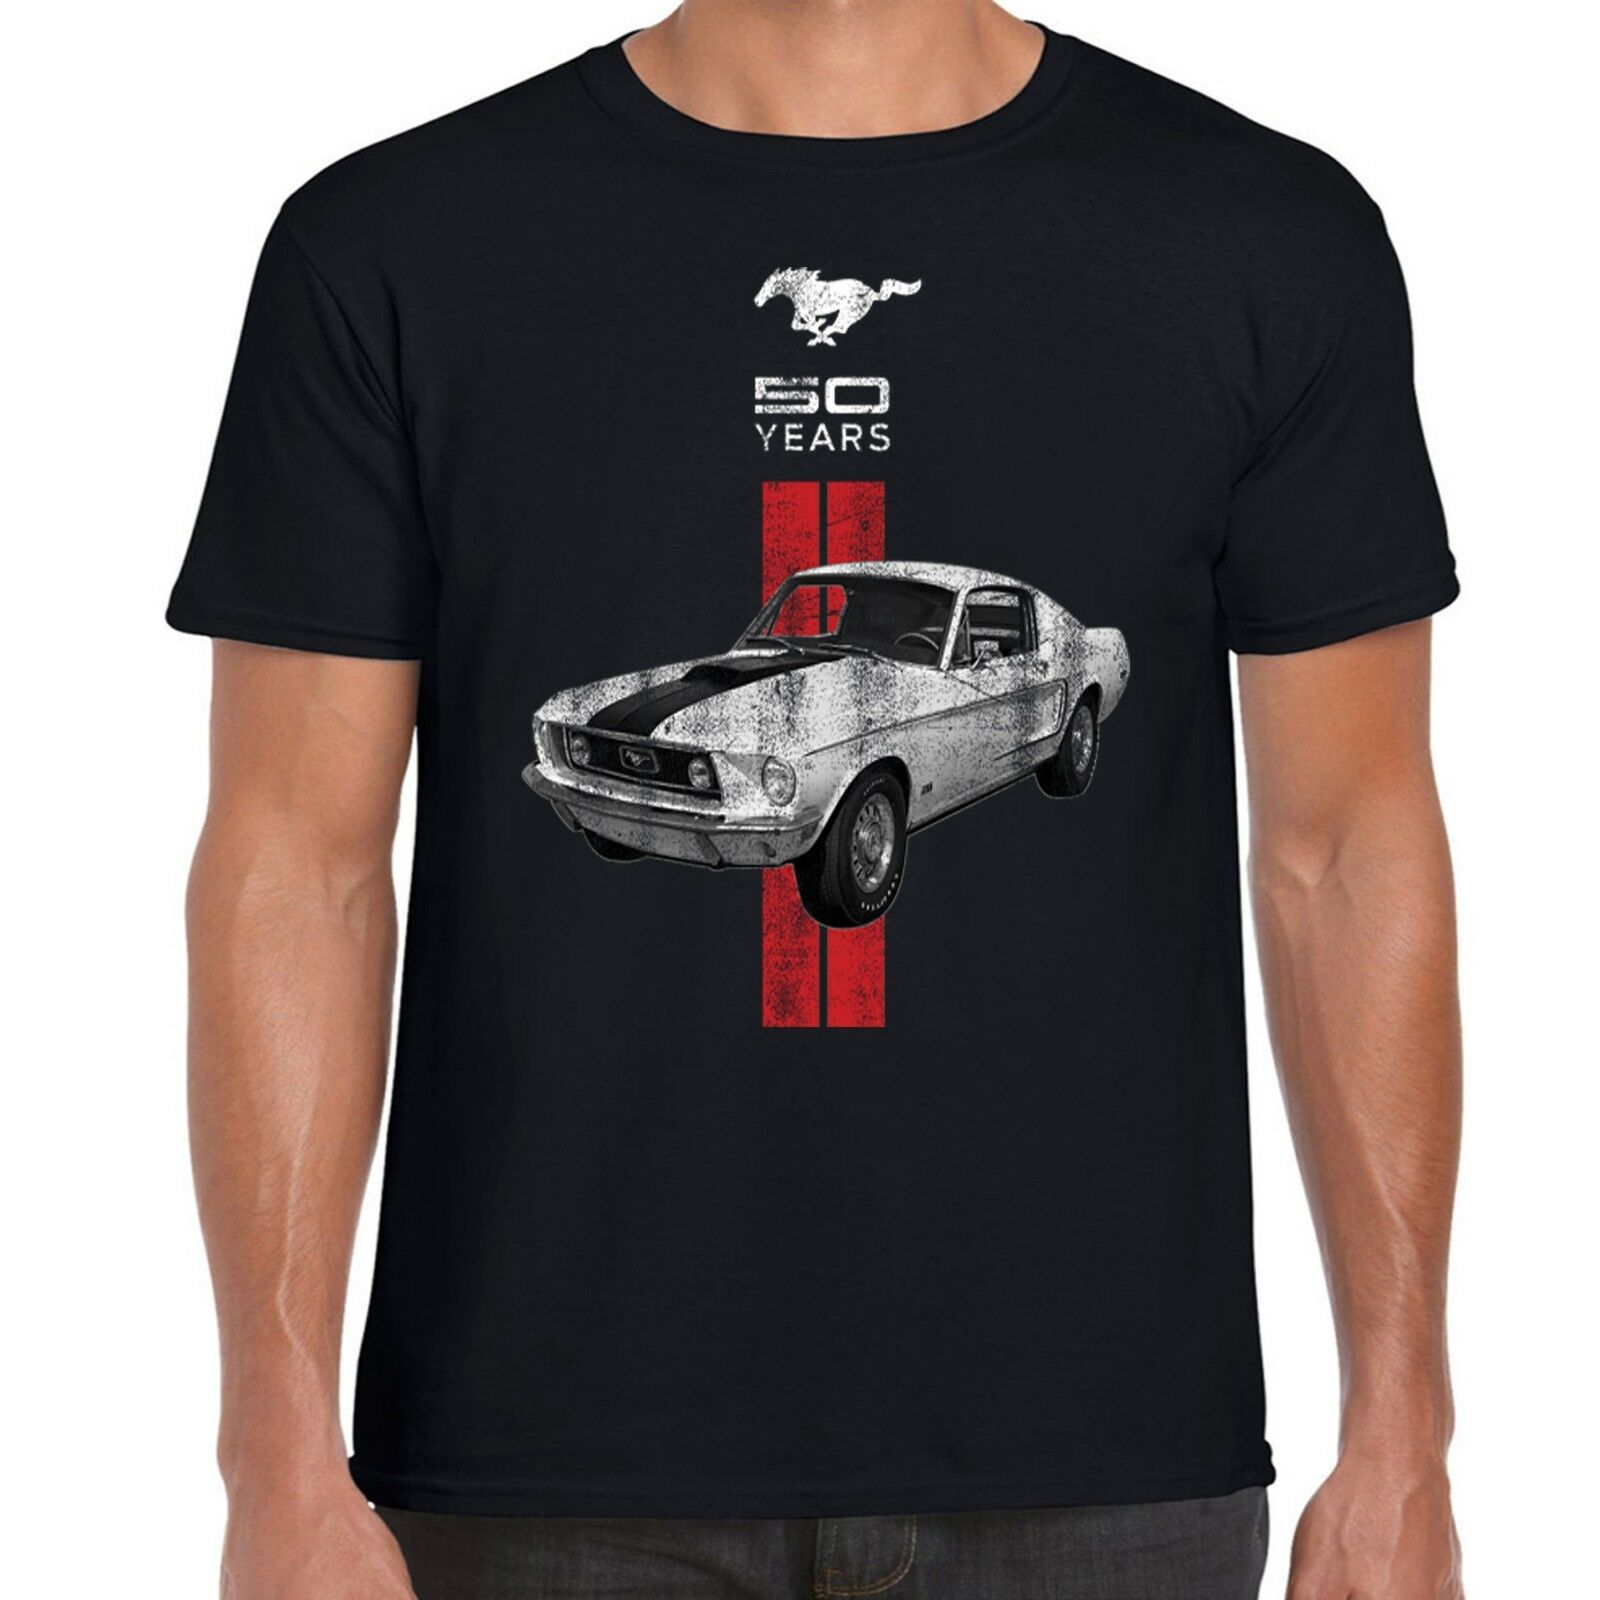 Ford Mustang T-shirt